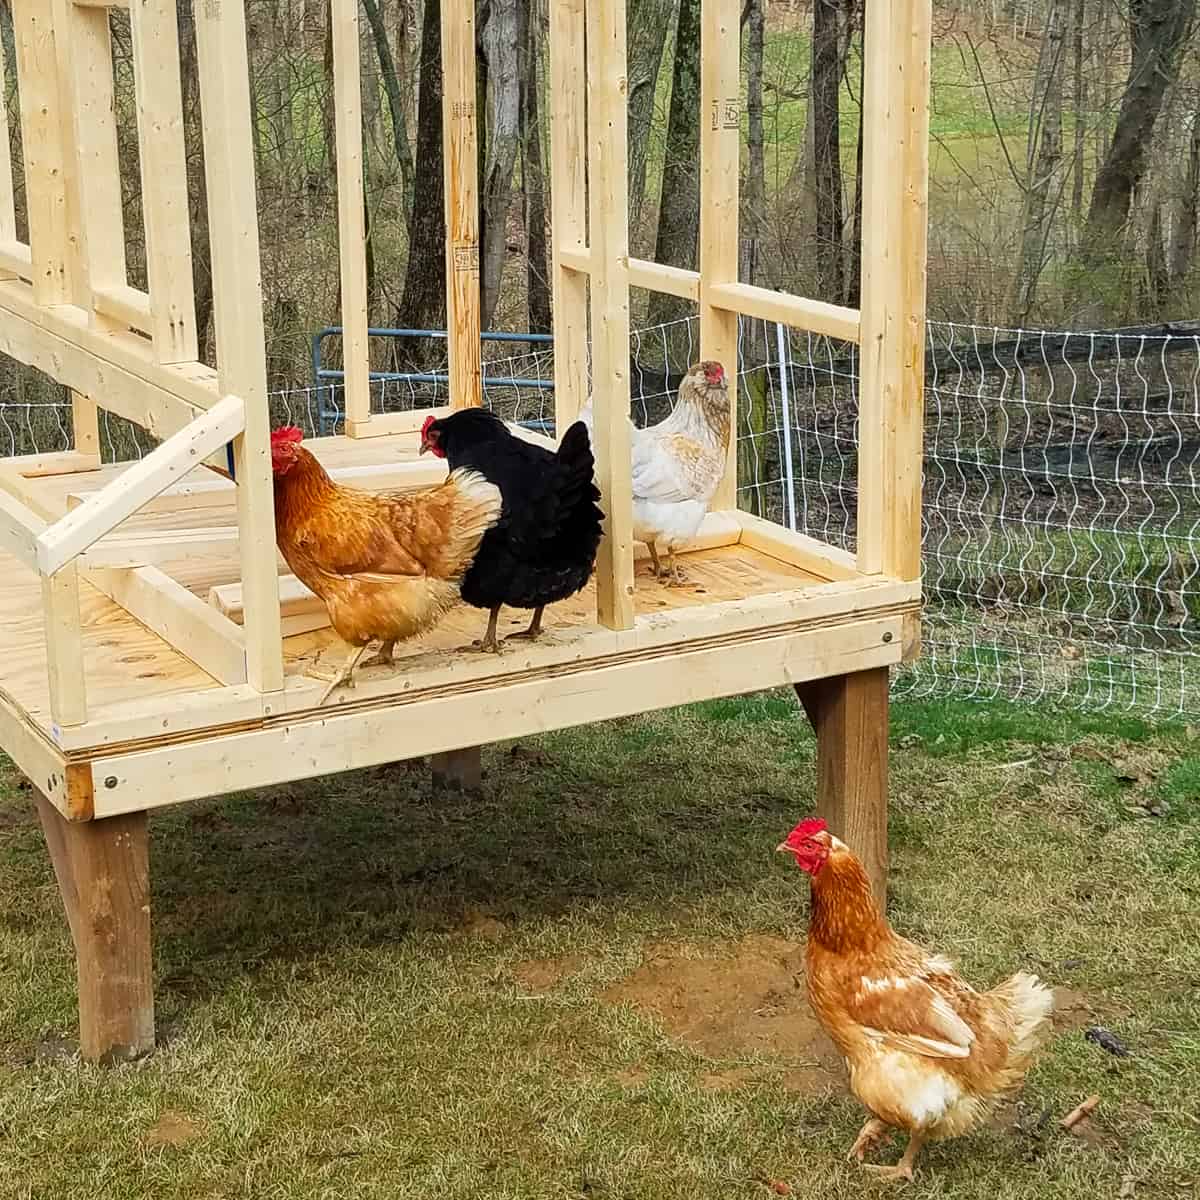 Building a backyard coop for chickens to lay fresh eggs